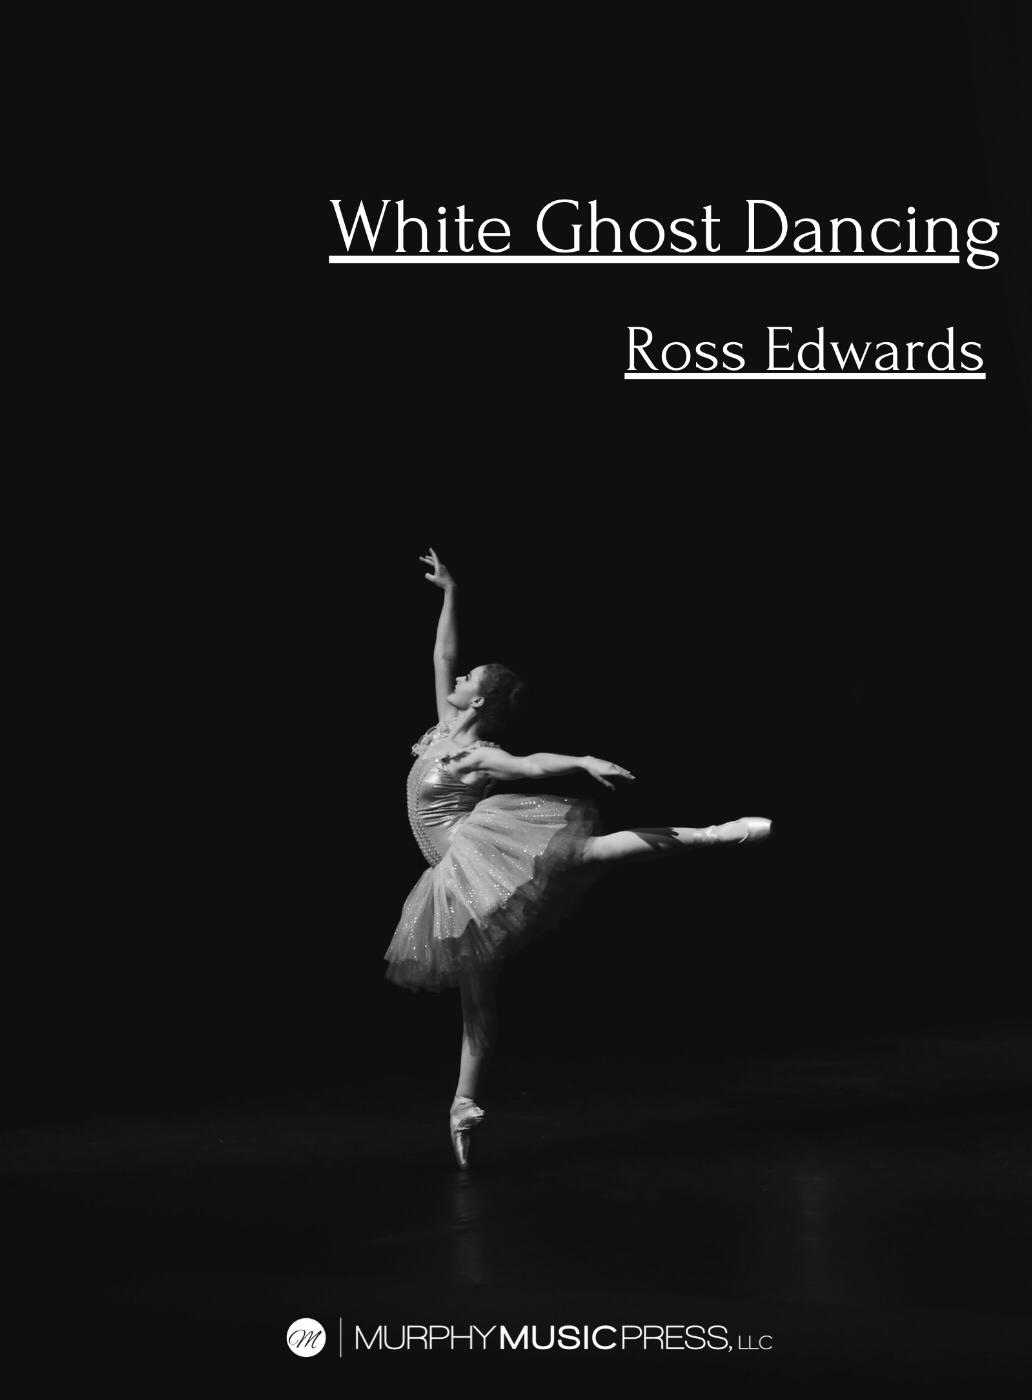 White Ghost Dancing by Ross Edwards